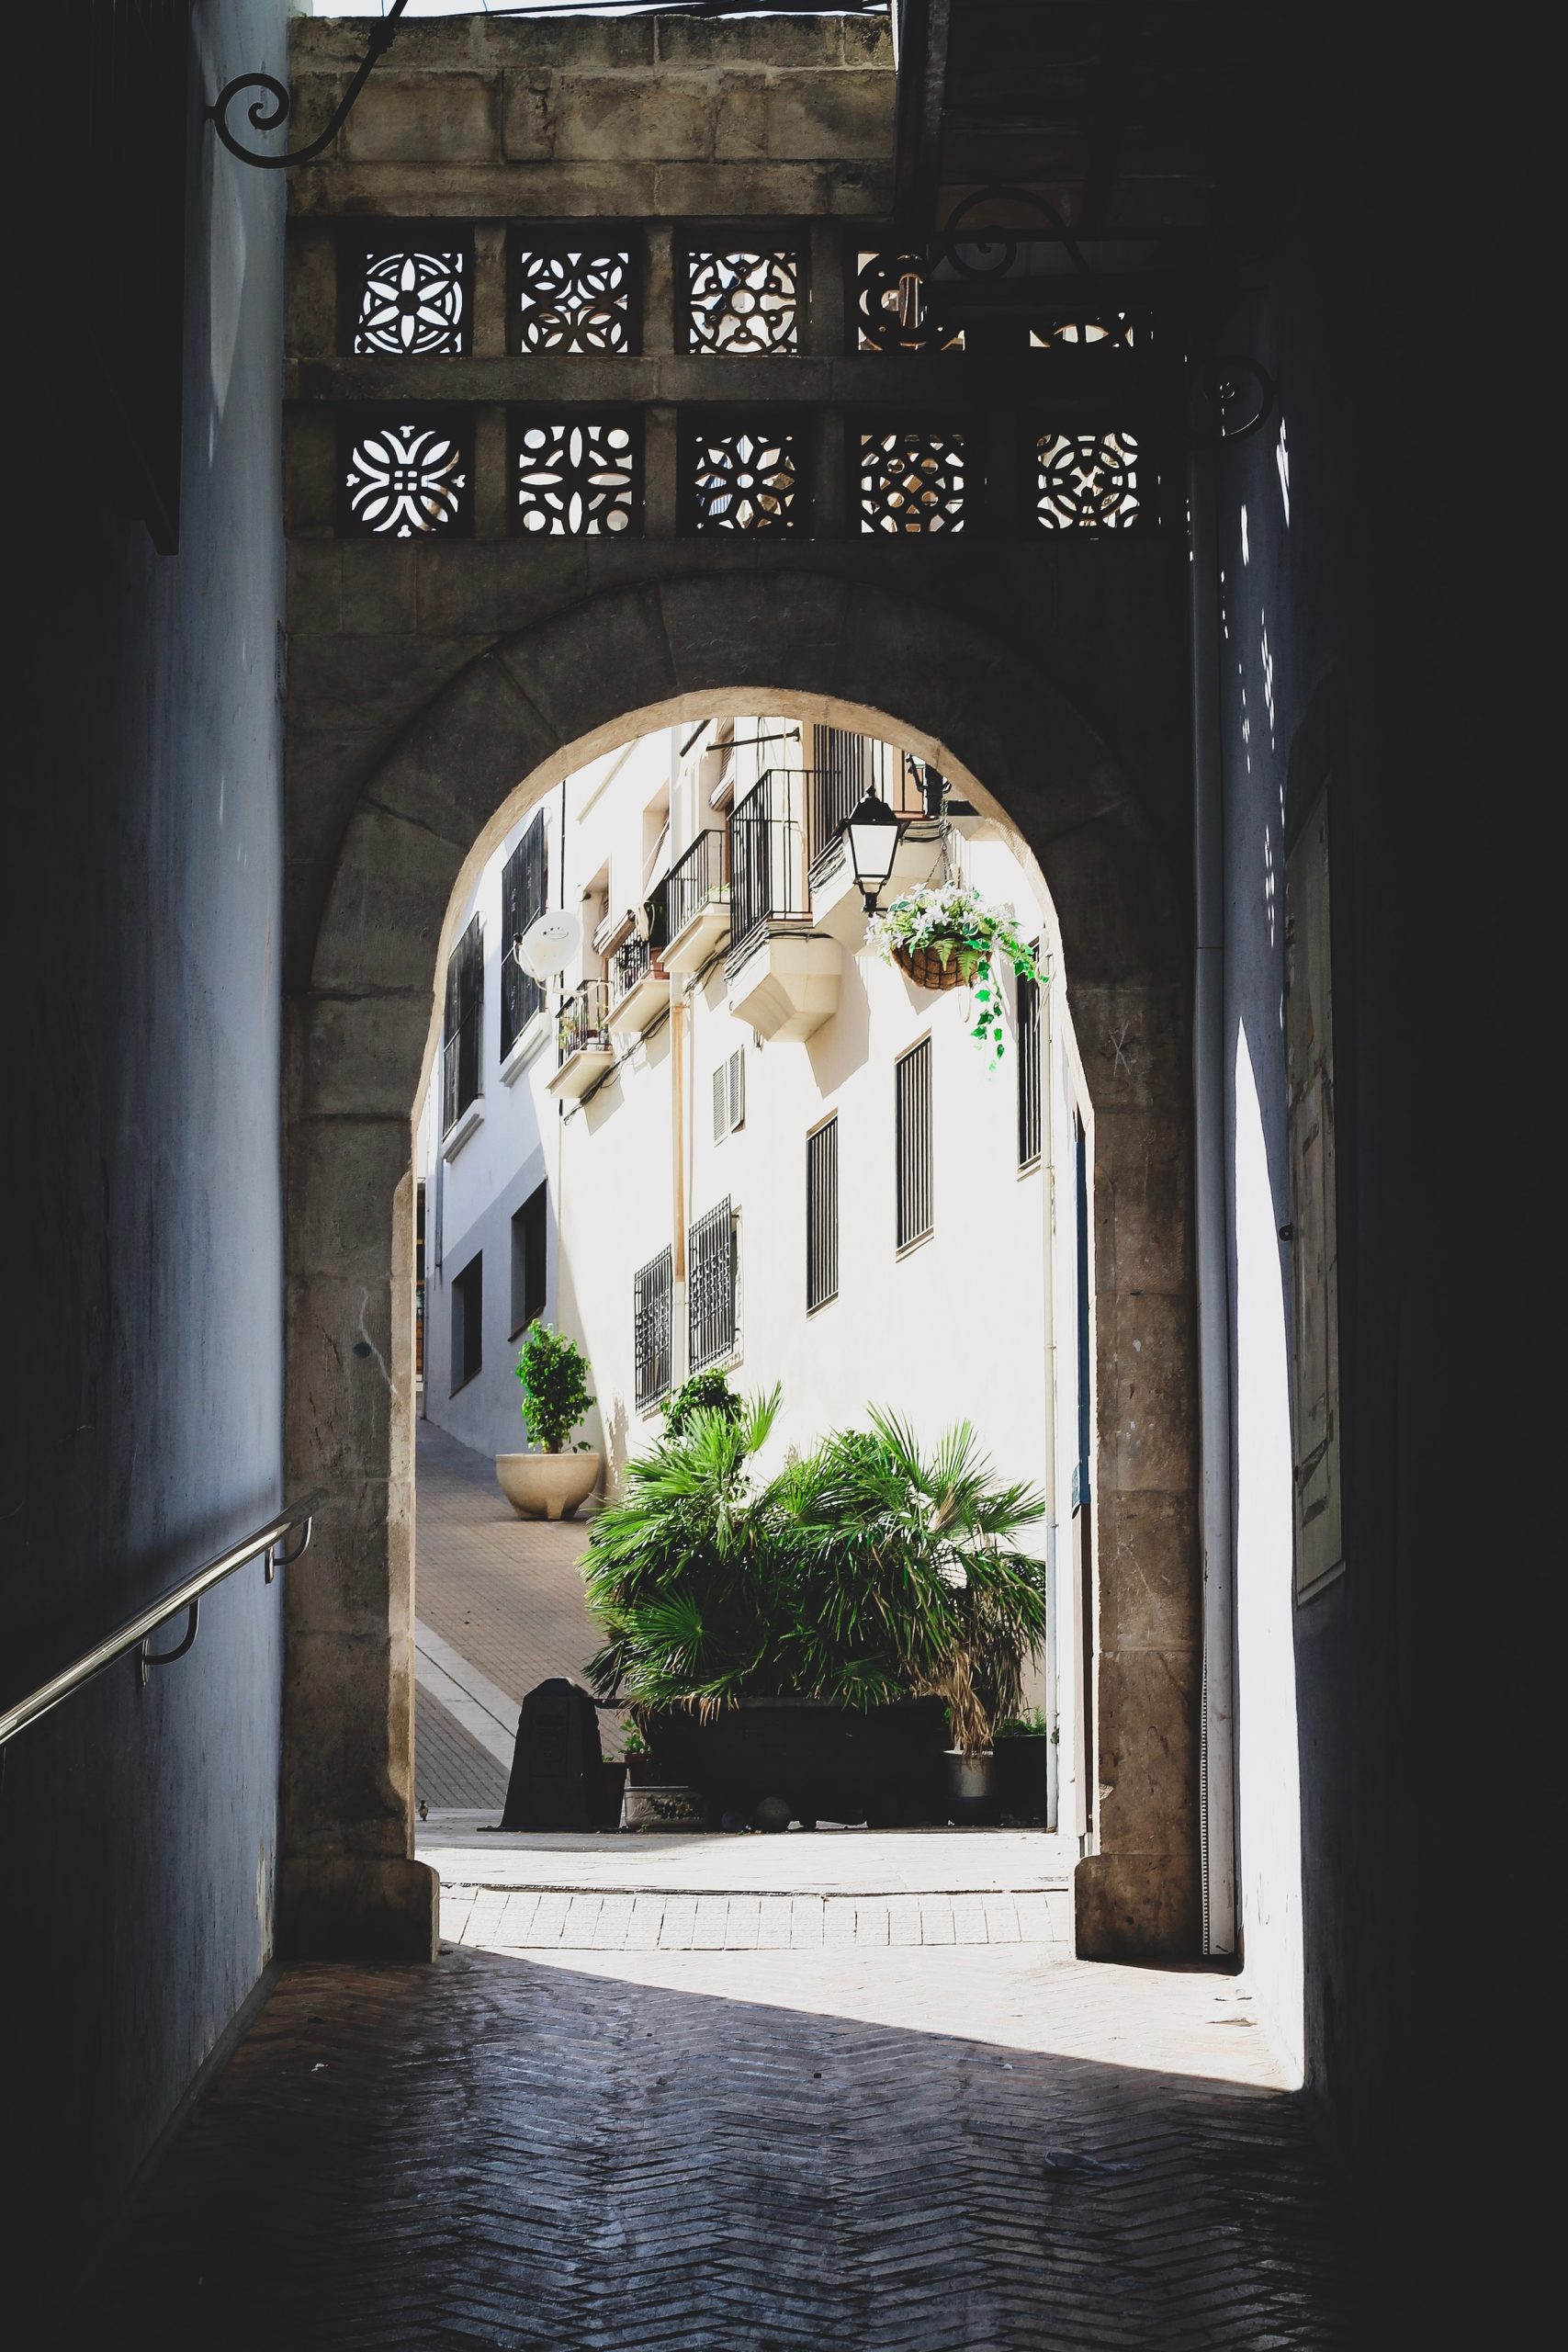 Moorish influences survive in the architecture of Calpe back alleys and passages throughout the Old Town